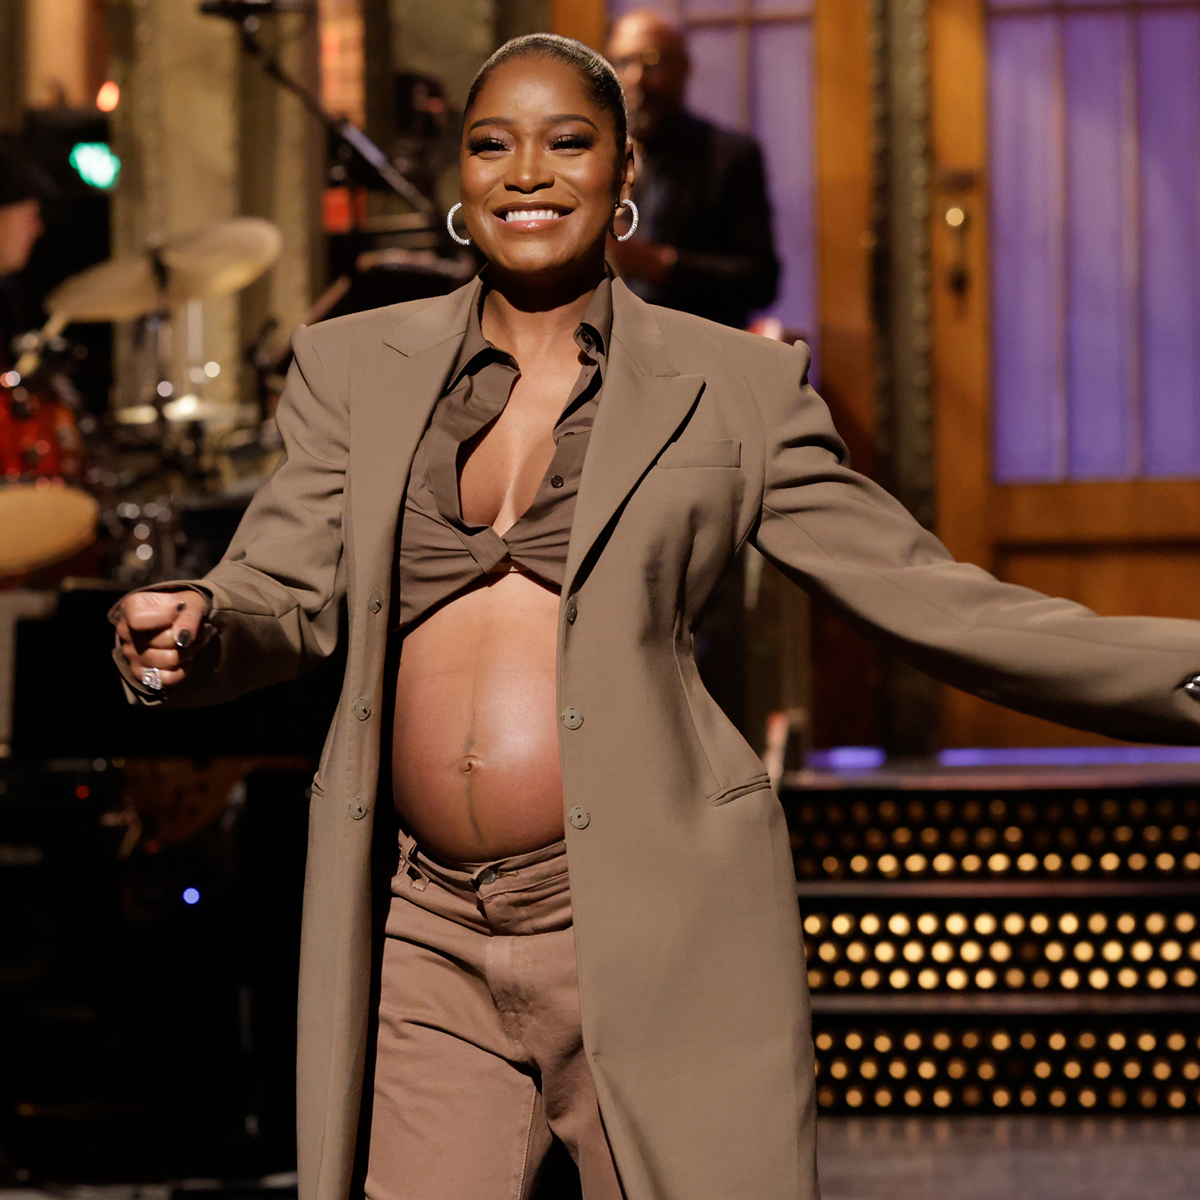 Pregnant Keke Palmer Proudly Shows Off Her Baby Bump in Dancing Video – E! Online